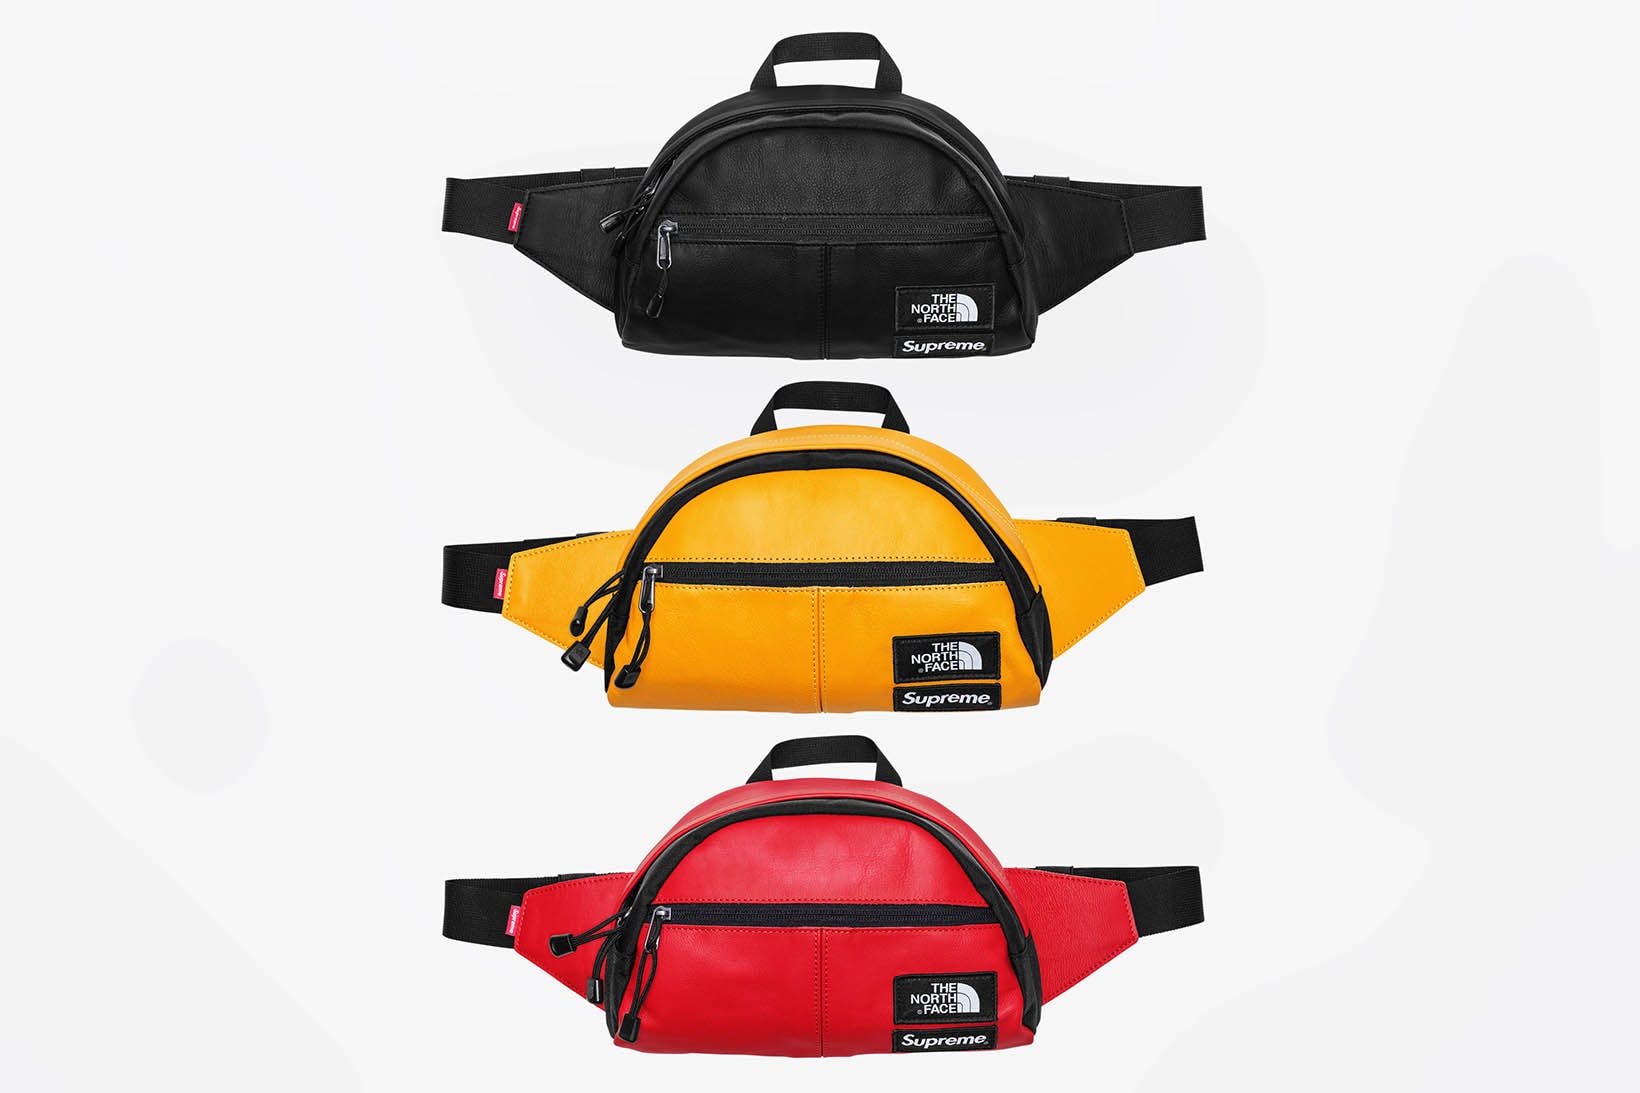 Supreme x The North Face 2017 Fall Group Daypack